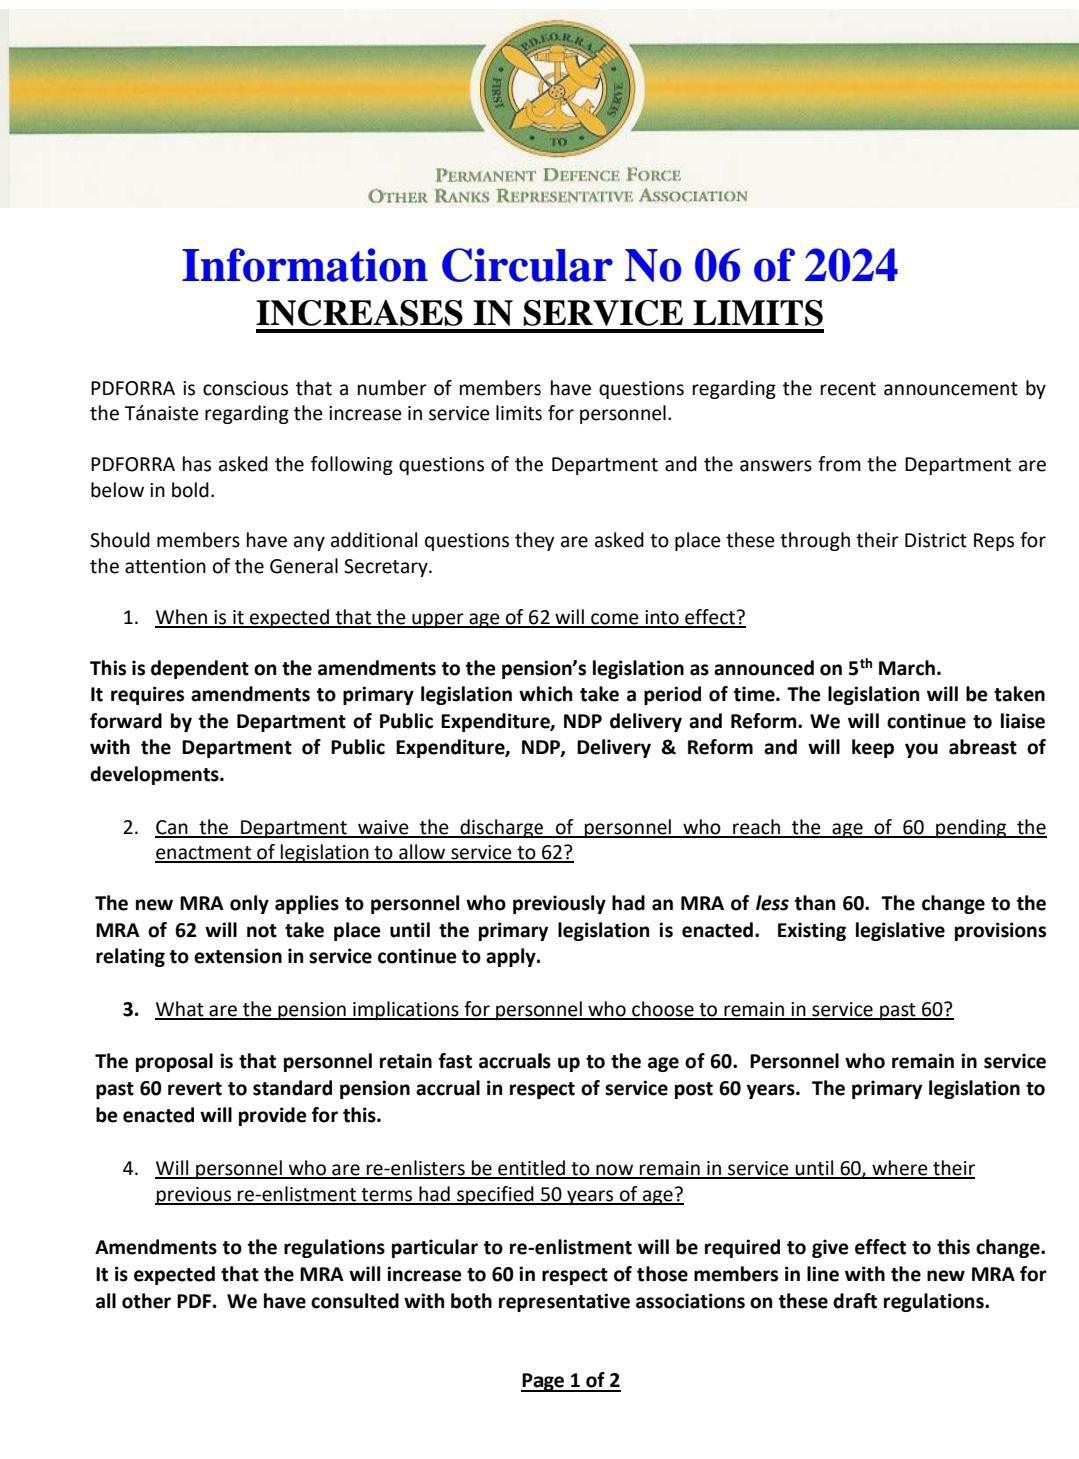 Information Circular No 06 of 2024 - Continuance in Service from 60 to 62 (Two Page Circular) 